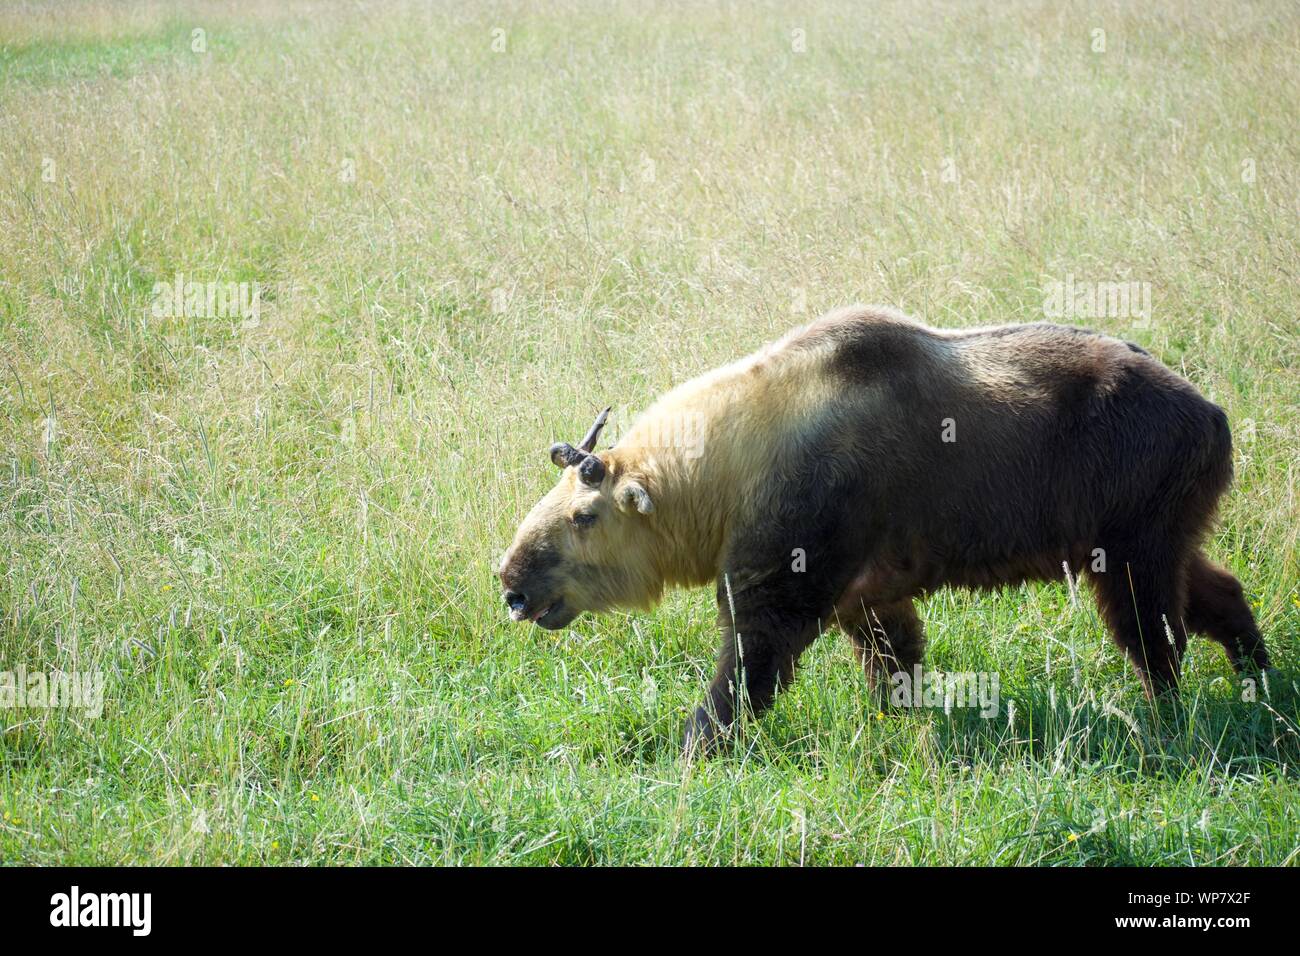 Sichuan Takin Isolated in Field. Budorcas taxicolor tibetana is a Sheep or Goat-like mammal from western china. Species is endangered an conservation Stock Photo